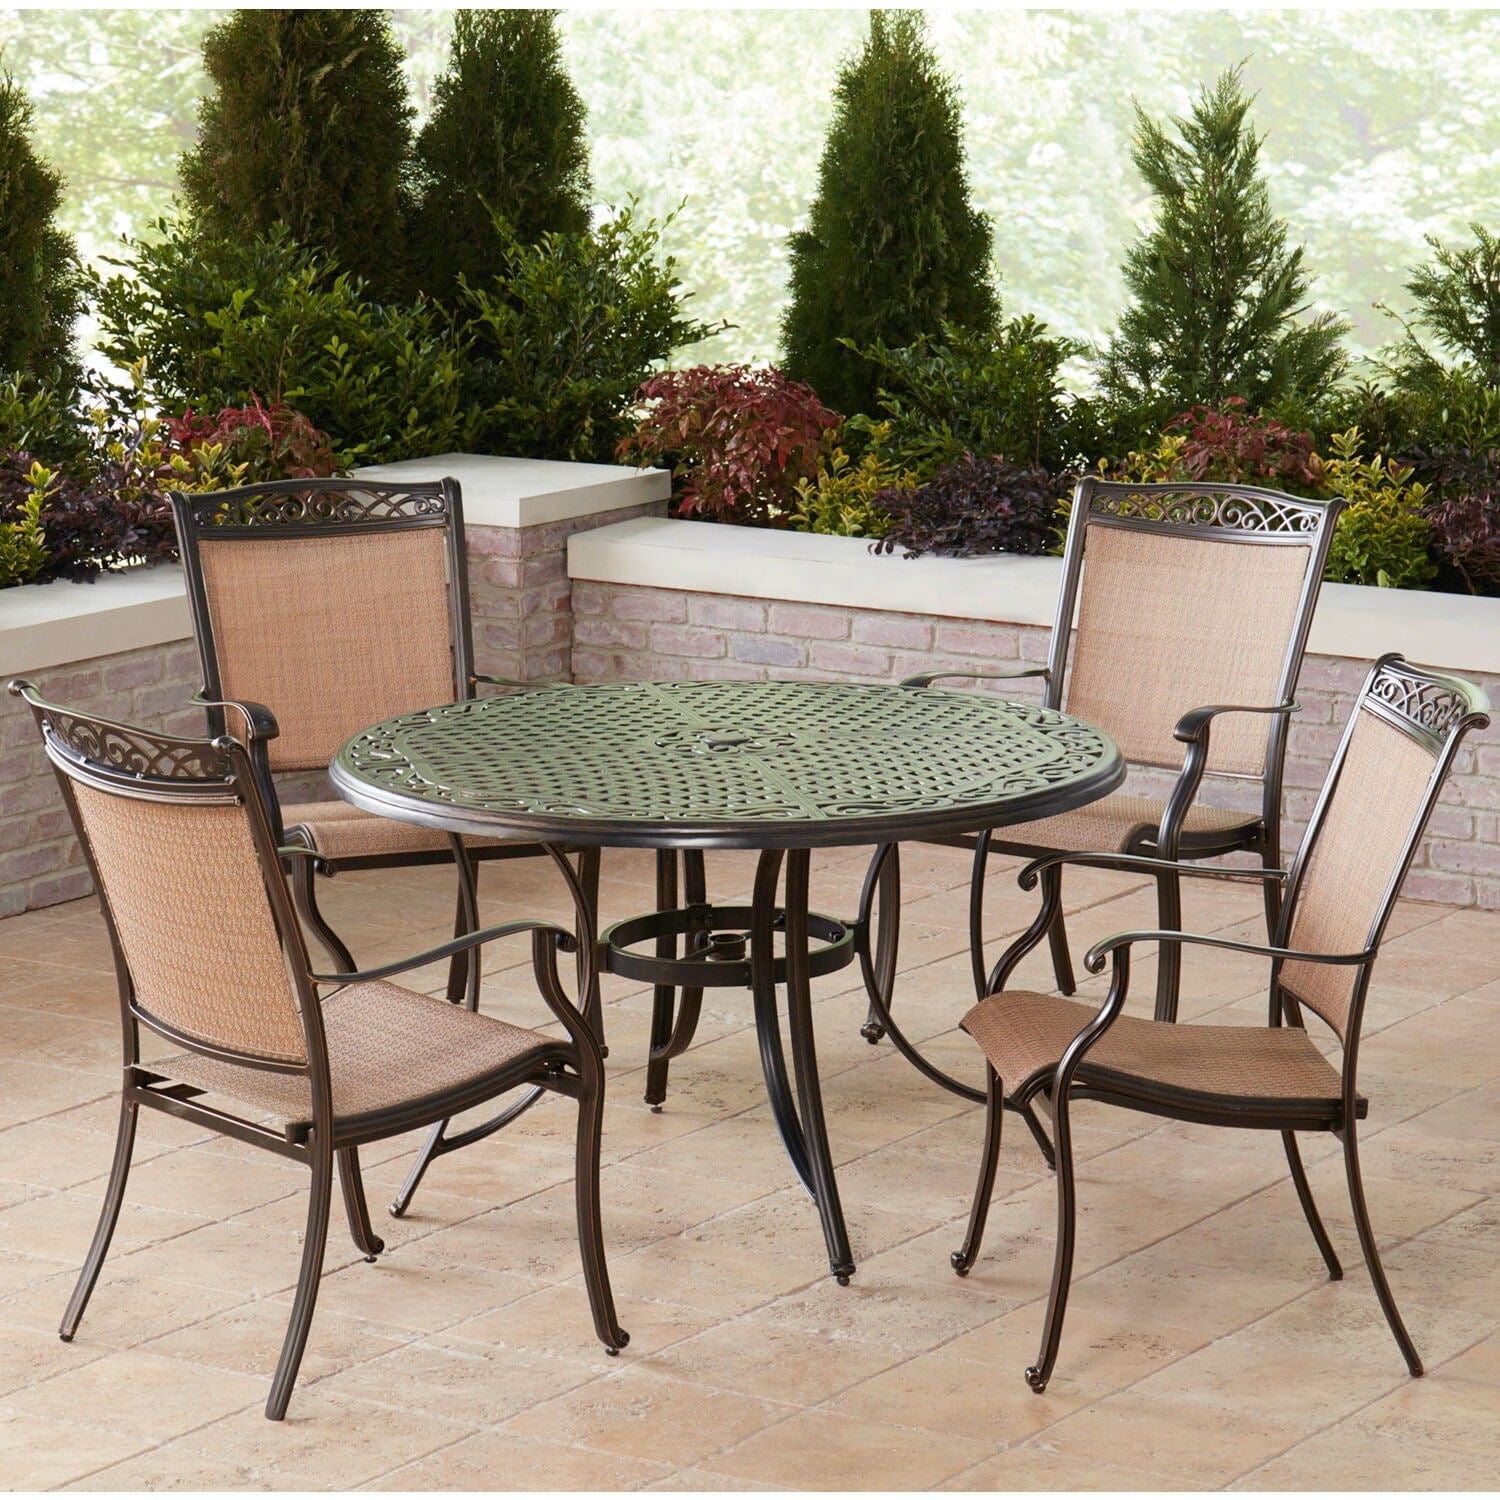 Hanover Outdoor Dining Set Hanover Fontana 5-Piece Outdoor Dining Set with 4 Sling Chairs and a 48-In. Cast-Top Table | FNTDN5PCC